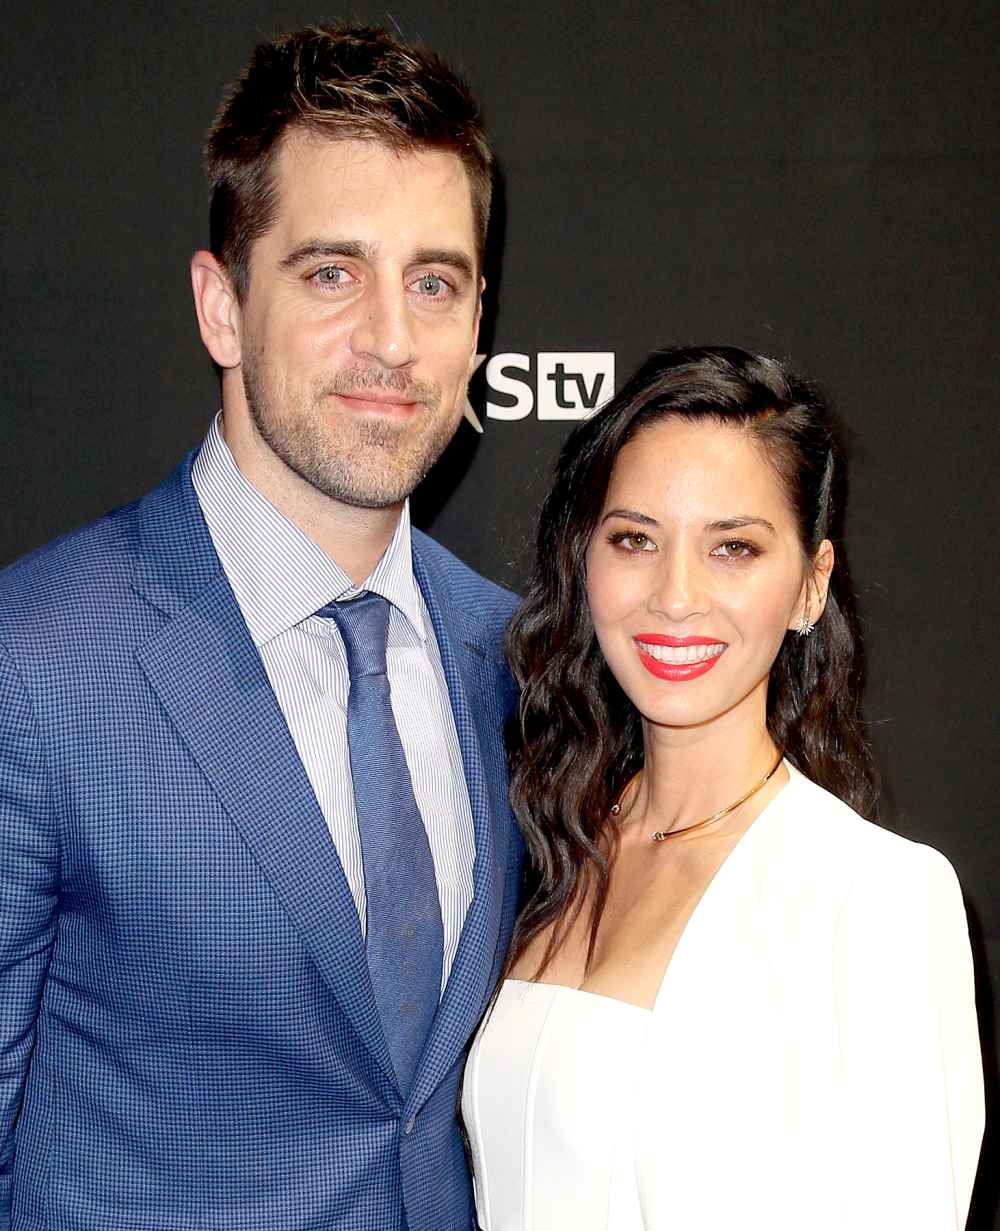 Aaron Rodgers and Olivia Munn attend the DirecTV and Pepsi Super Saturday Night featuring Red Hot Chili Peppers at Pier 70 on February 6, 2016 in San Francisco, California.